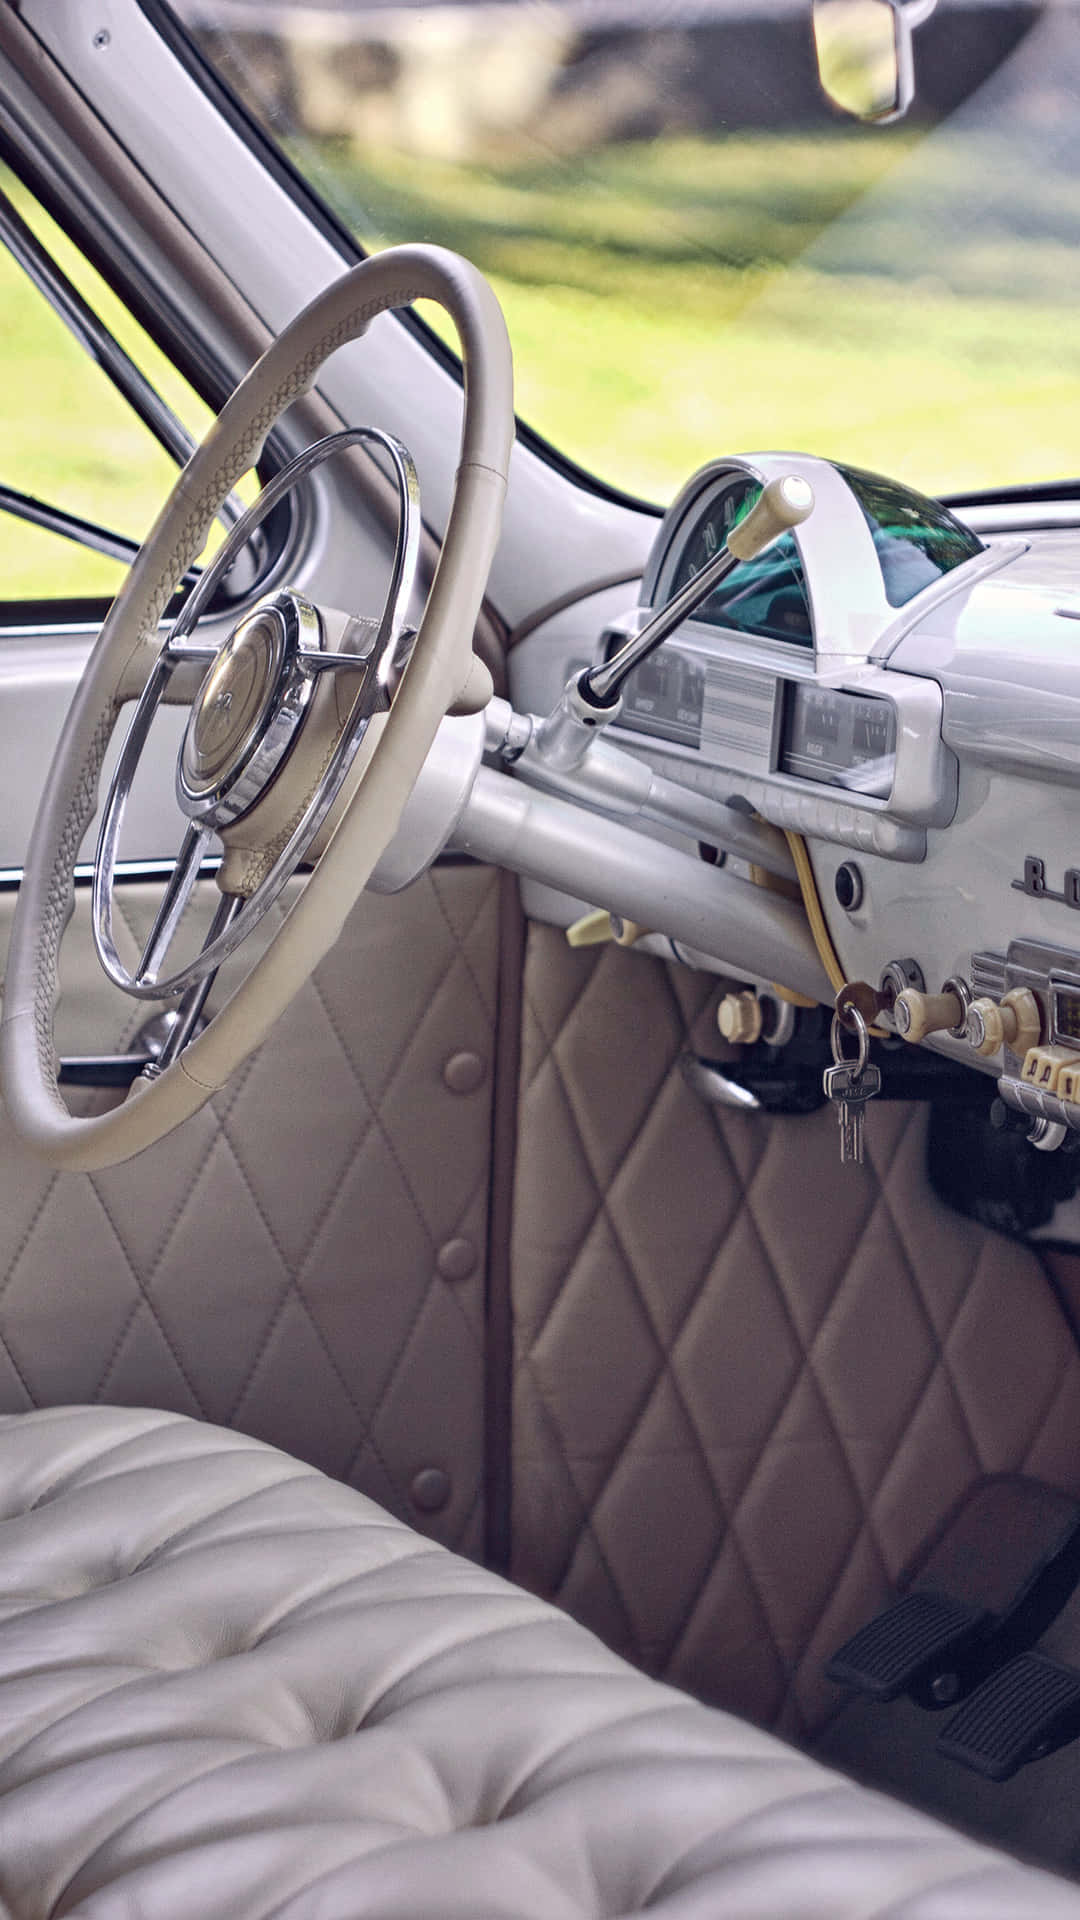 A Classic Car With A Leather Interior Wallpaper